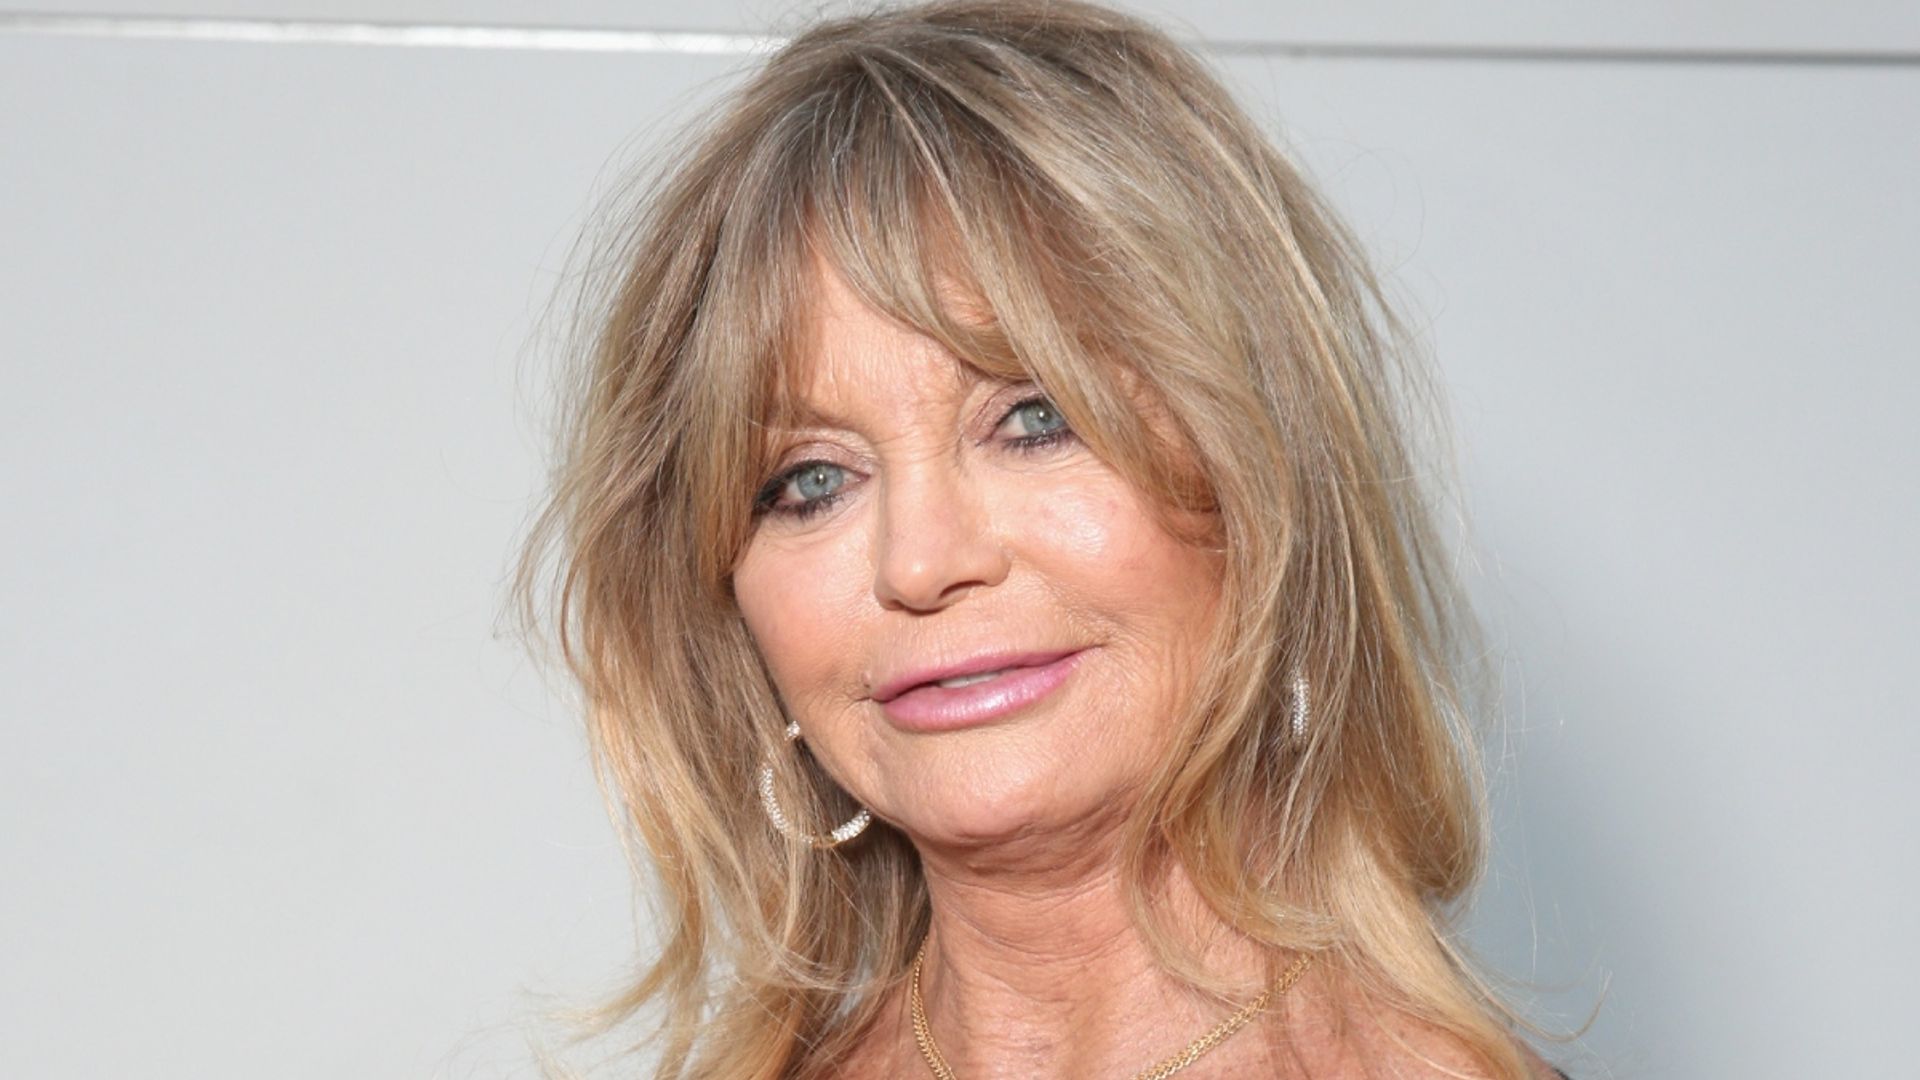 Goldie Hawn pays emotional tribute as she opens up about childhood struggles